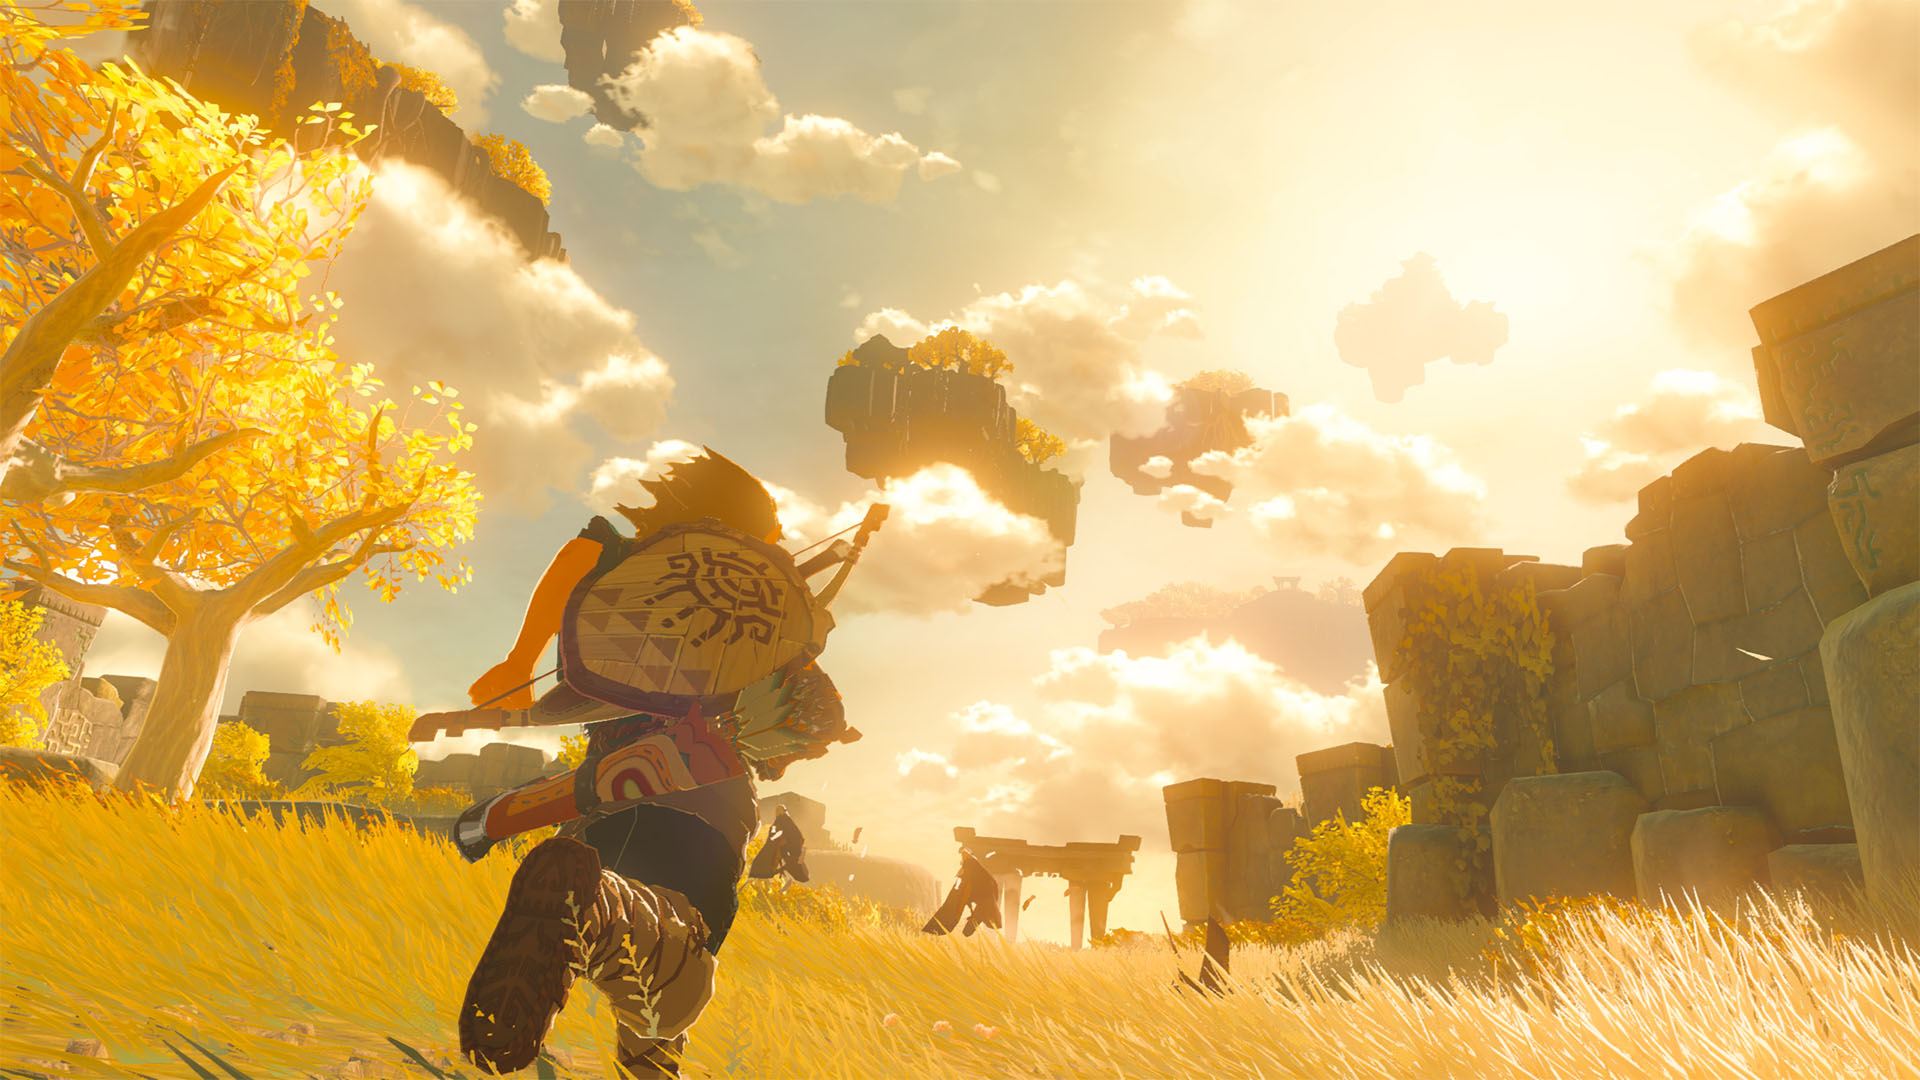 2022 Preview: Breath of the Wild 2 will take Zelda to dark places again